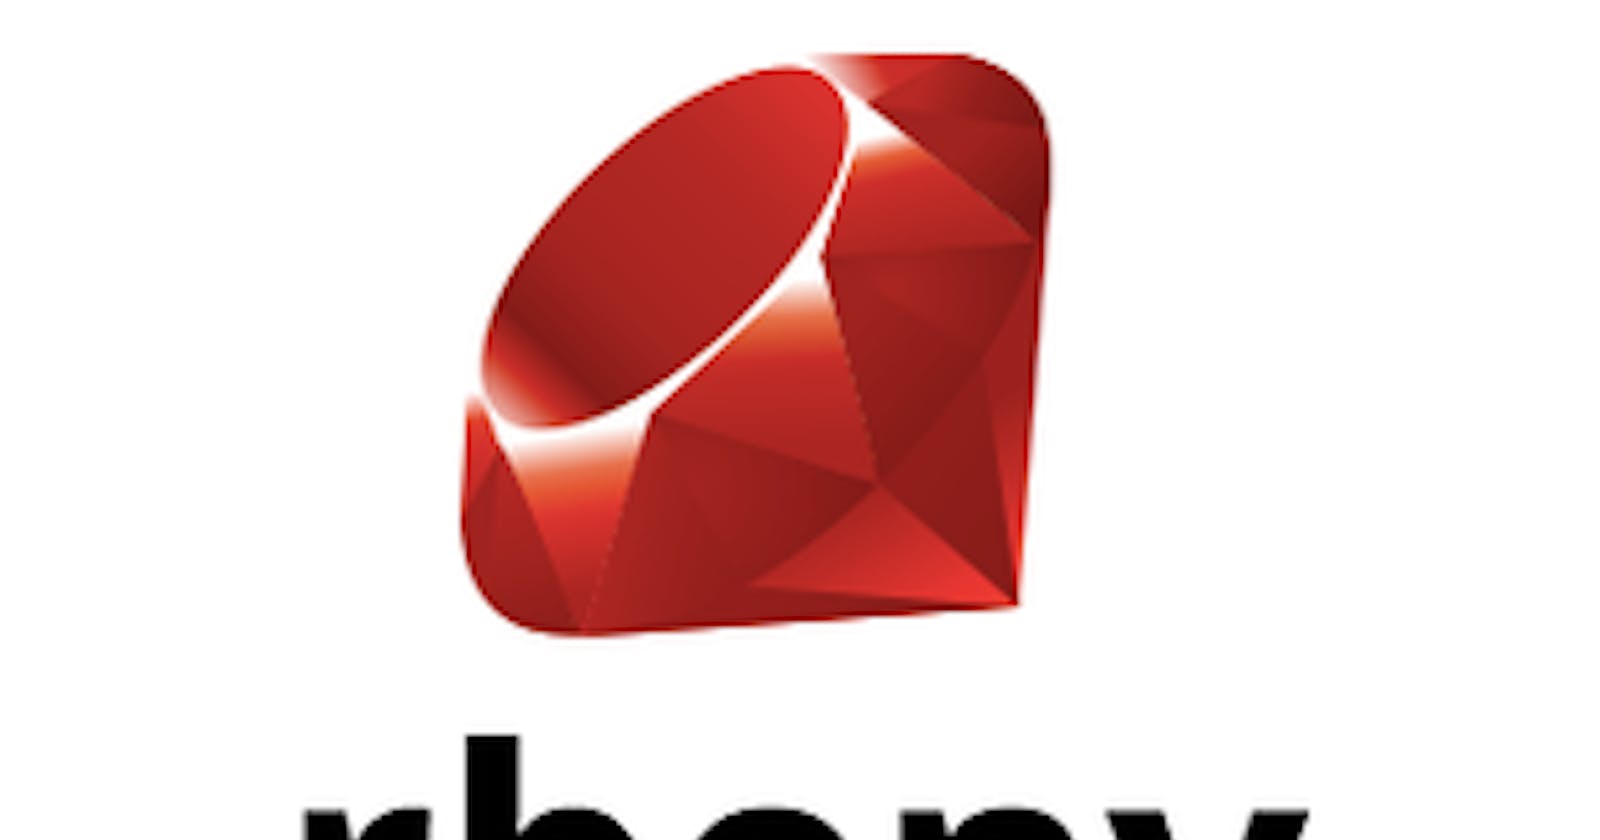 Step-by-step guide to setting up Ruby with Rbenv on Pop!_OS 22.04